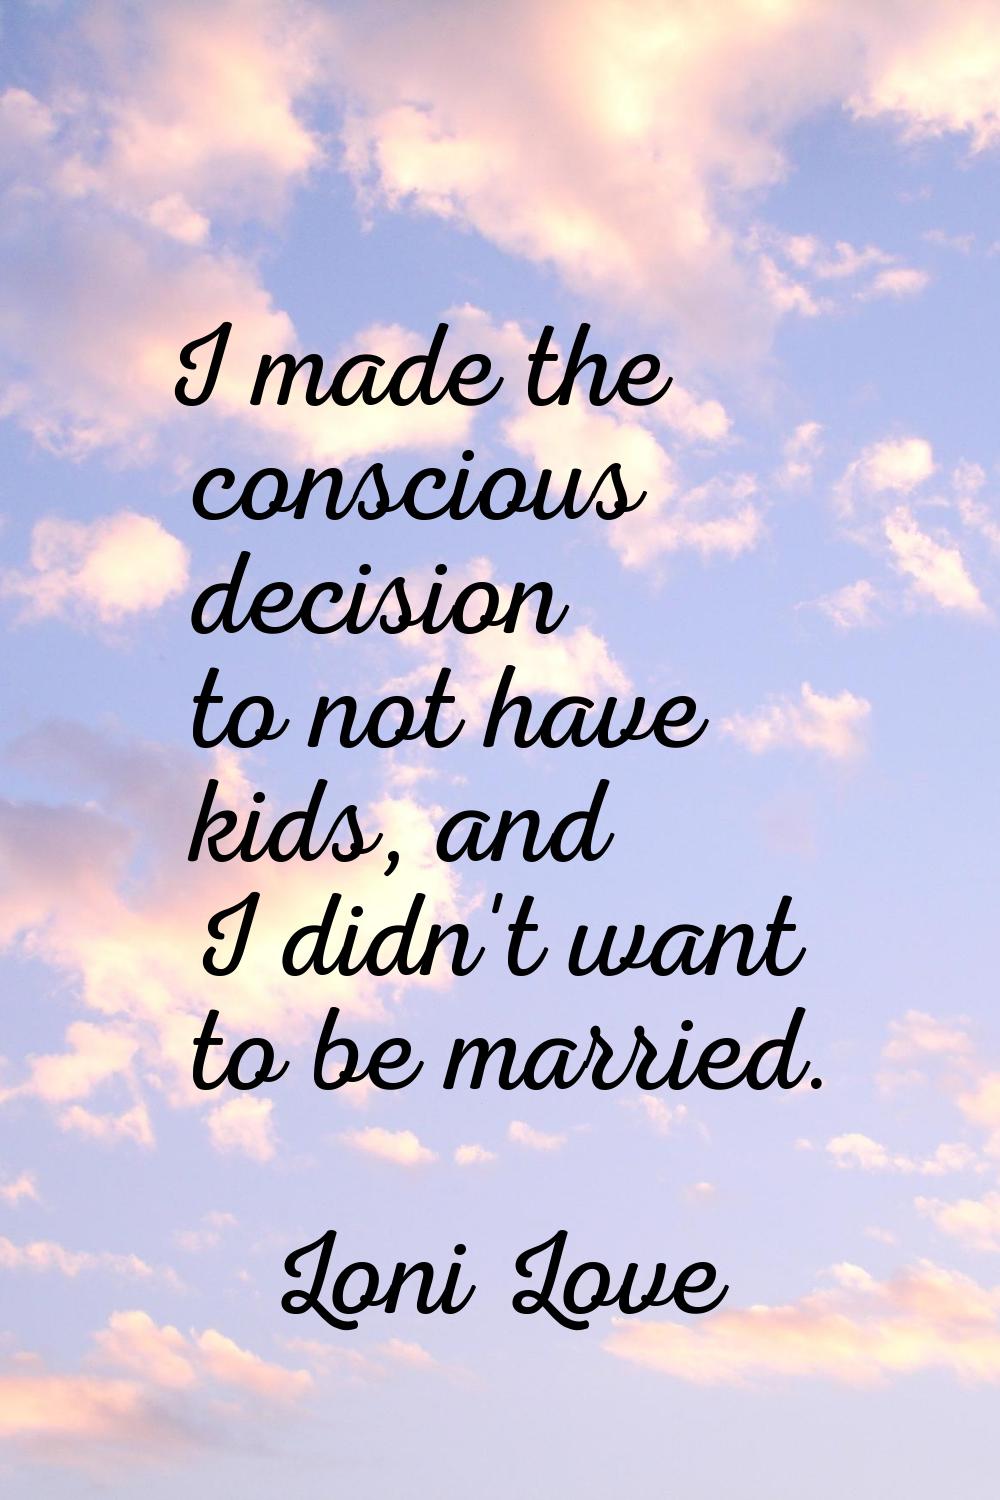 I made the conscious decision to not have kids, and I didn't want to be married.